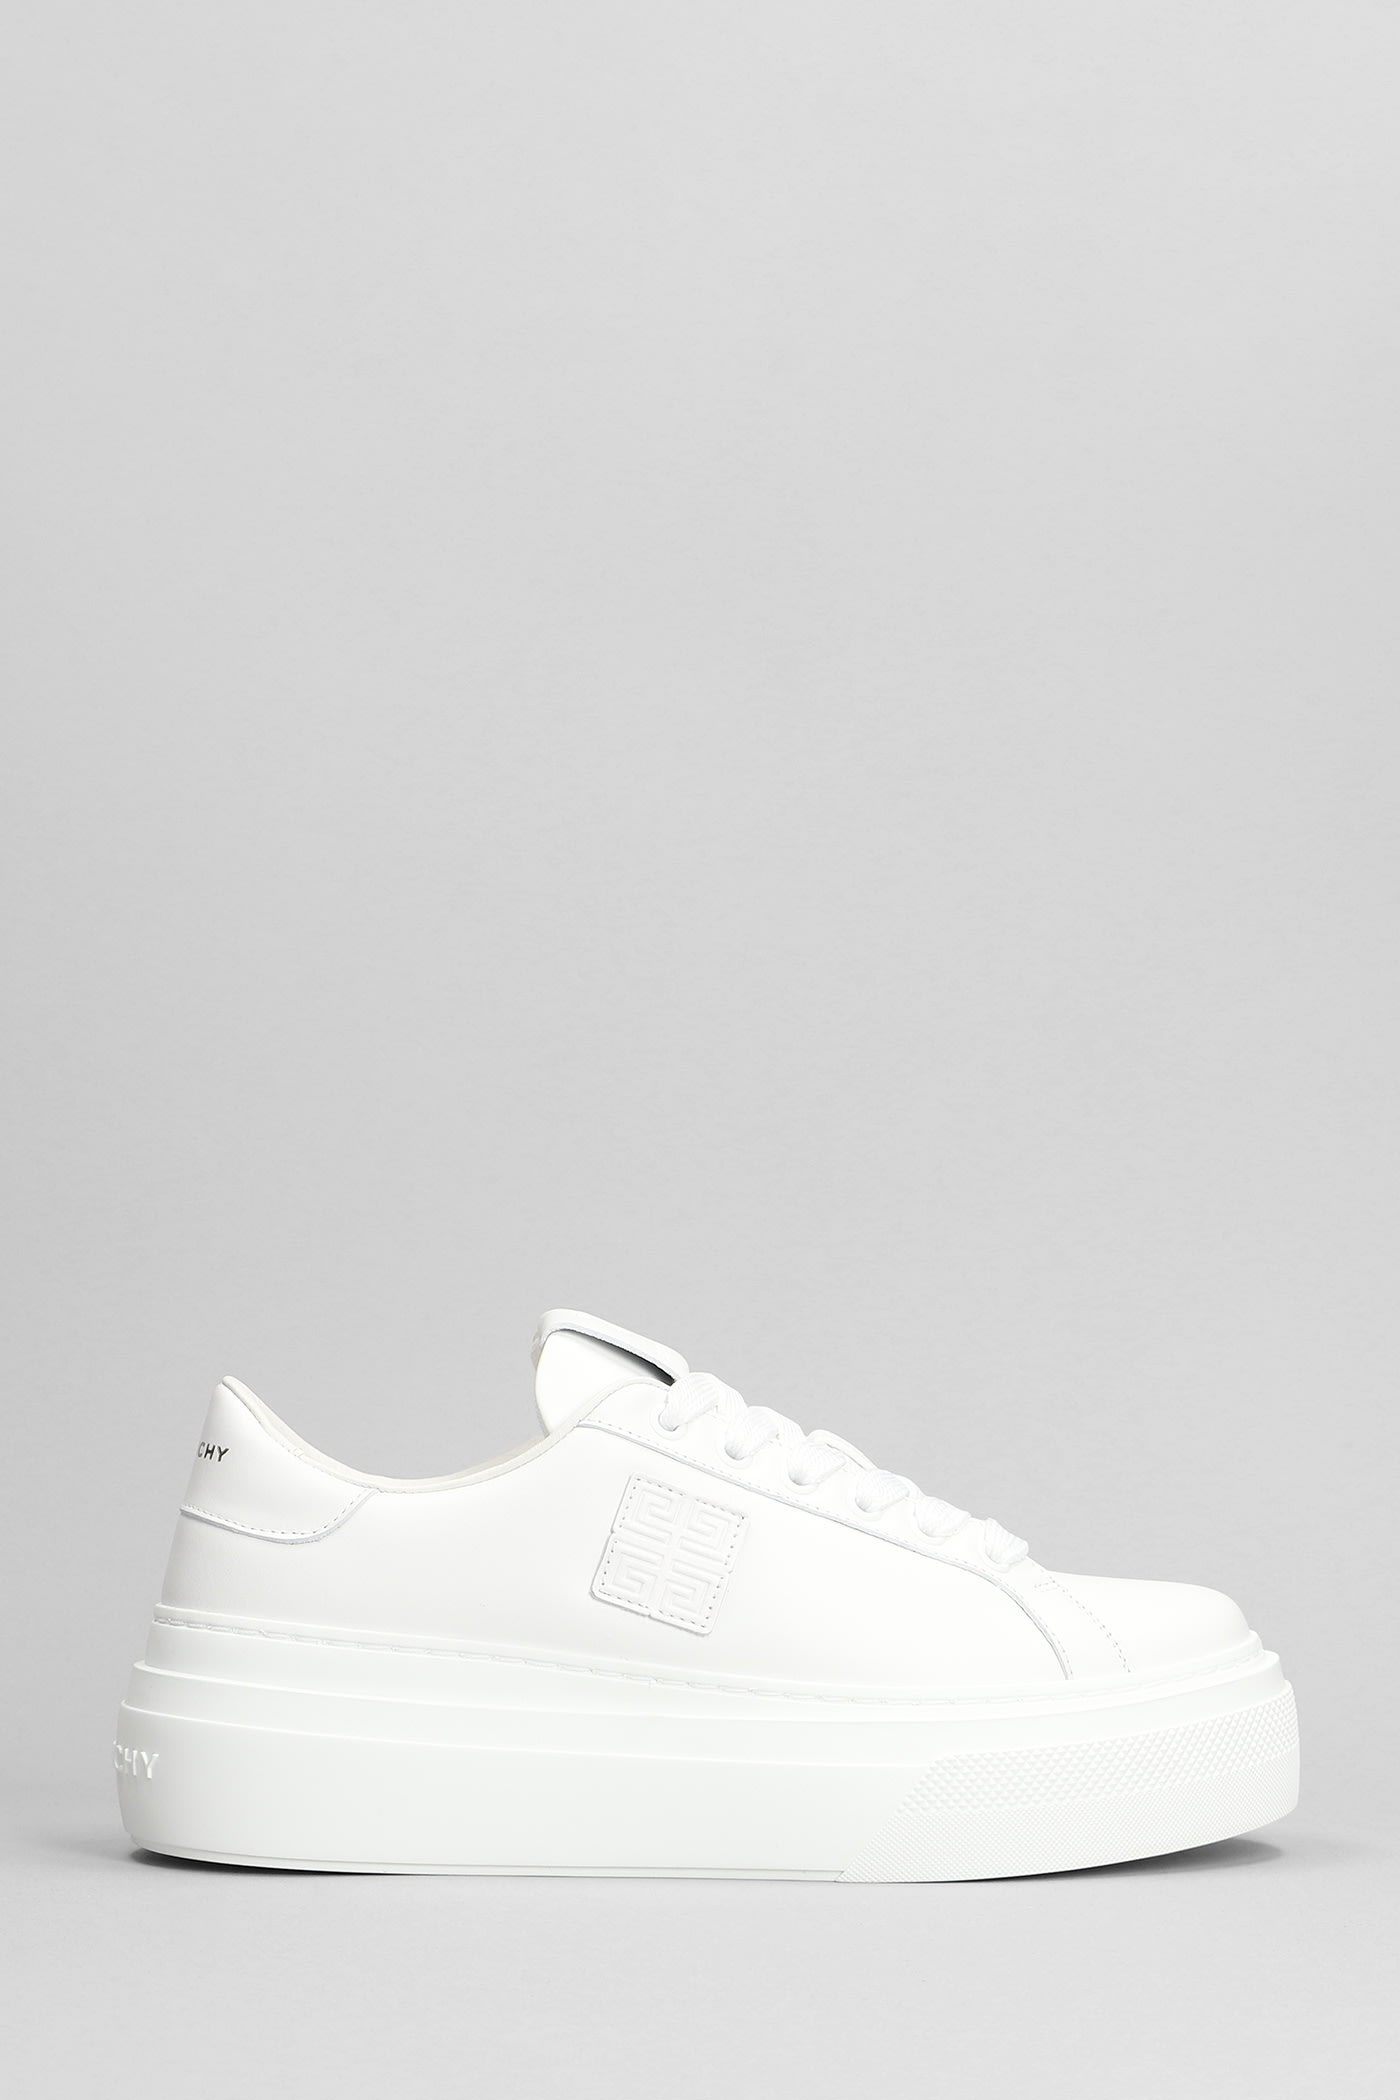 Givenchy City Platform Sneakers In White Leather